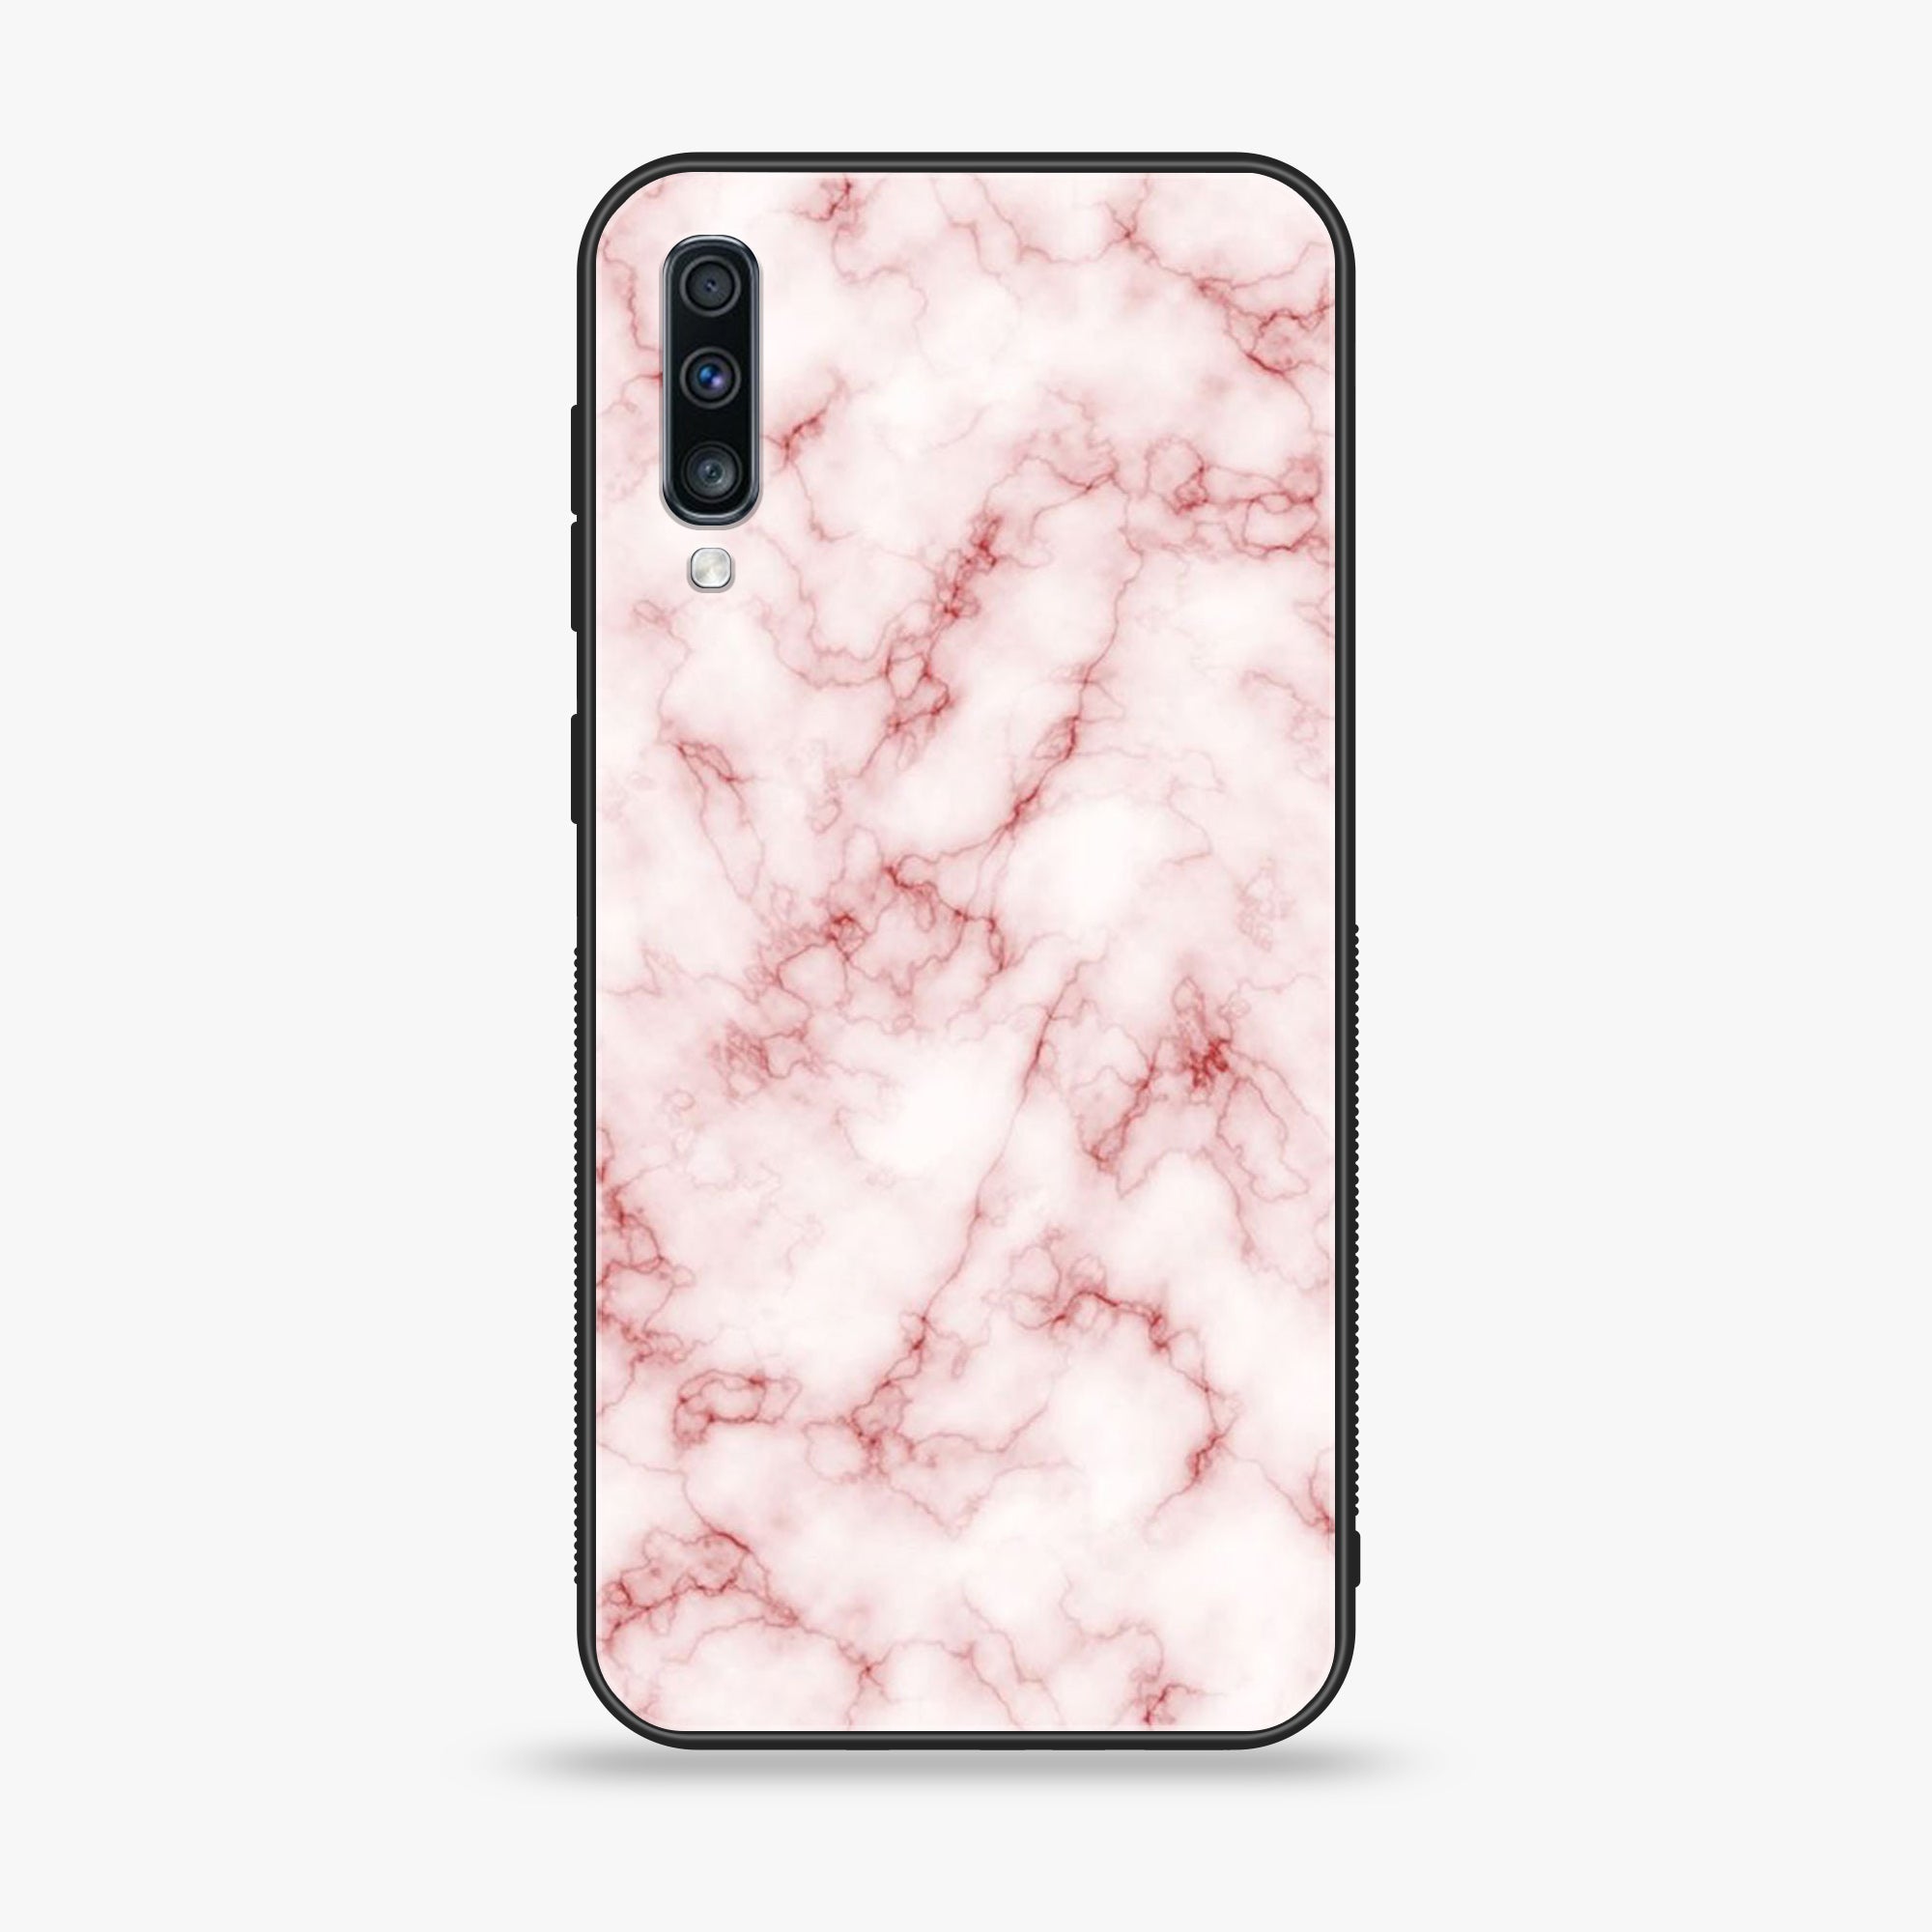 Samsung Galaxy A70 - Pink Marble Series - Premium Printed Glass soft Bumper shock Proof Case